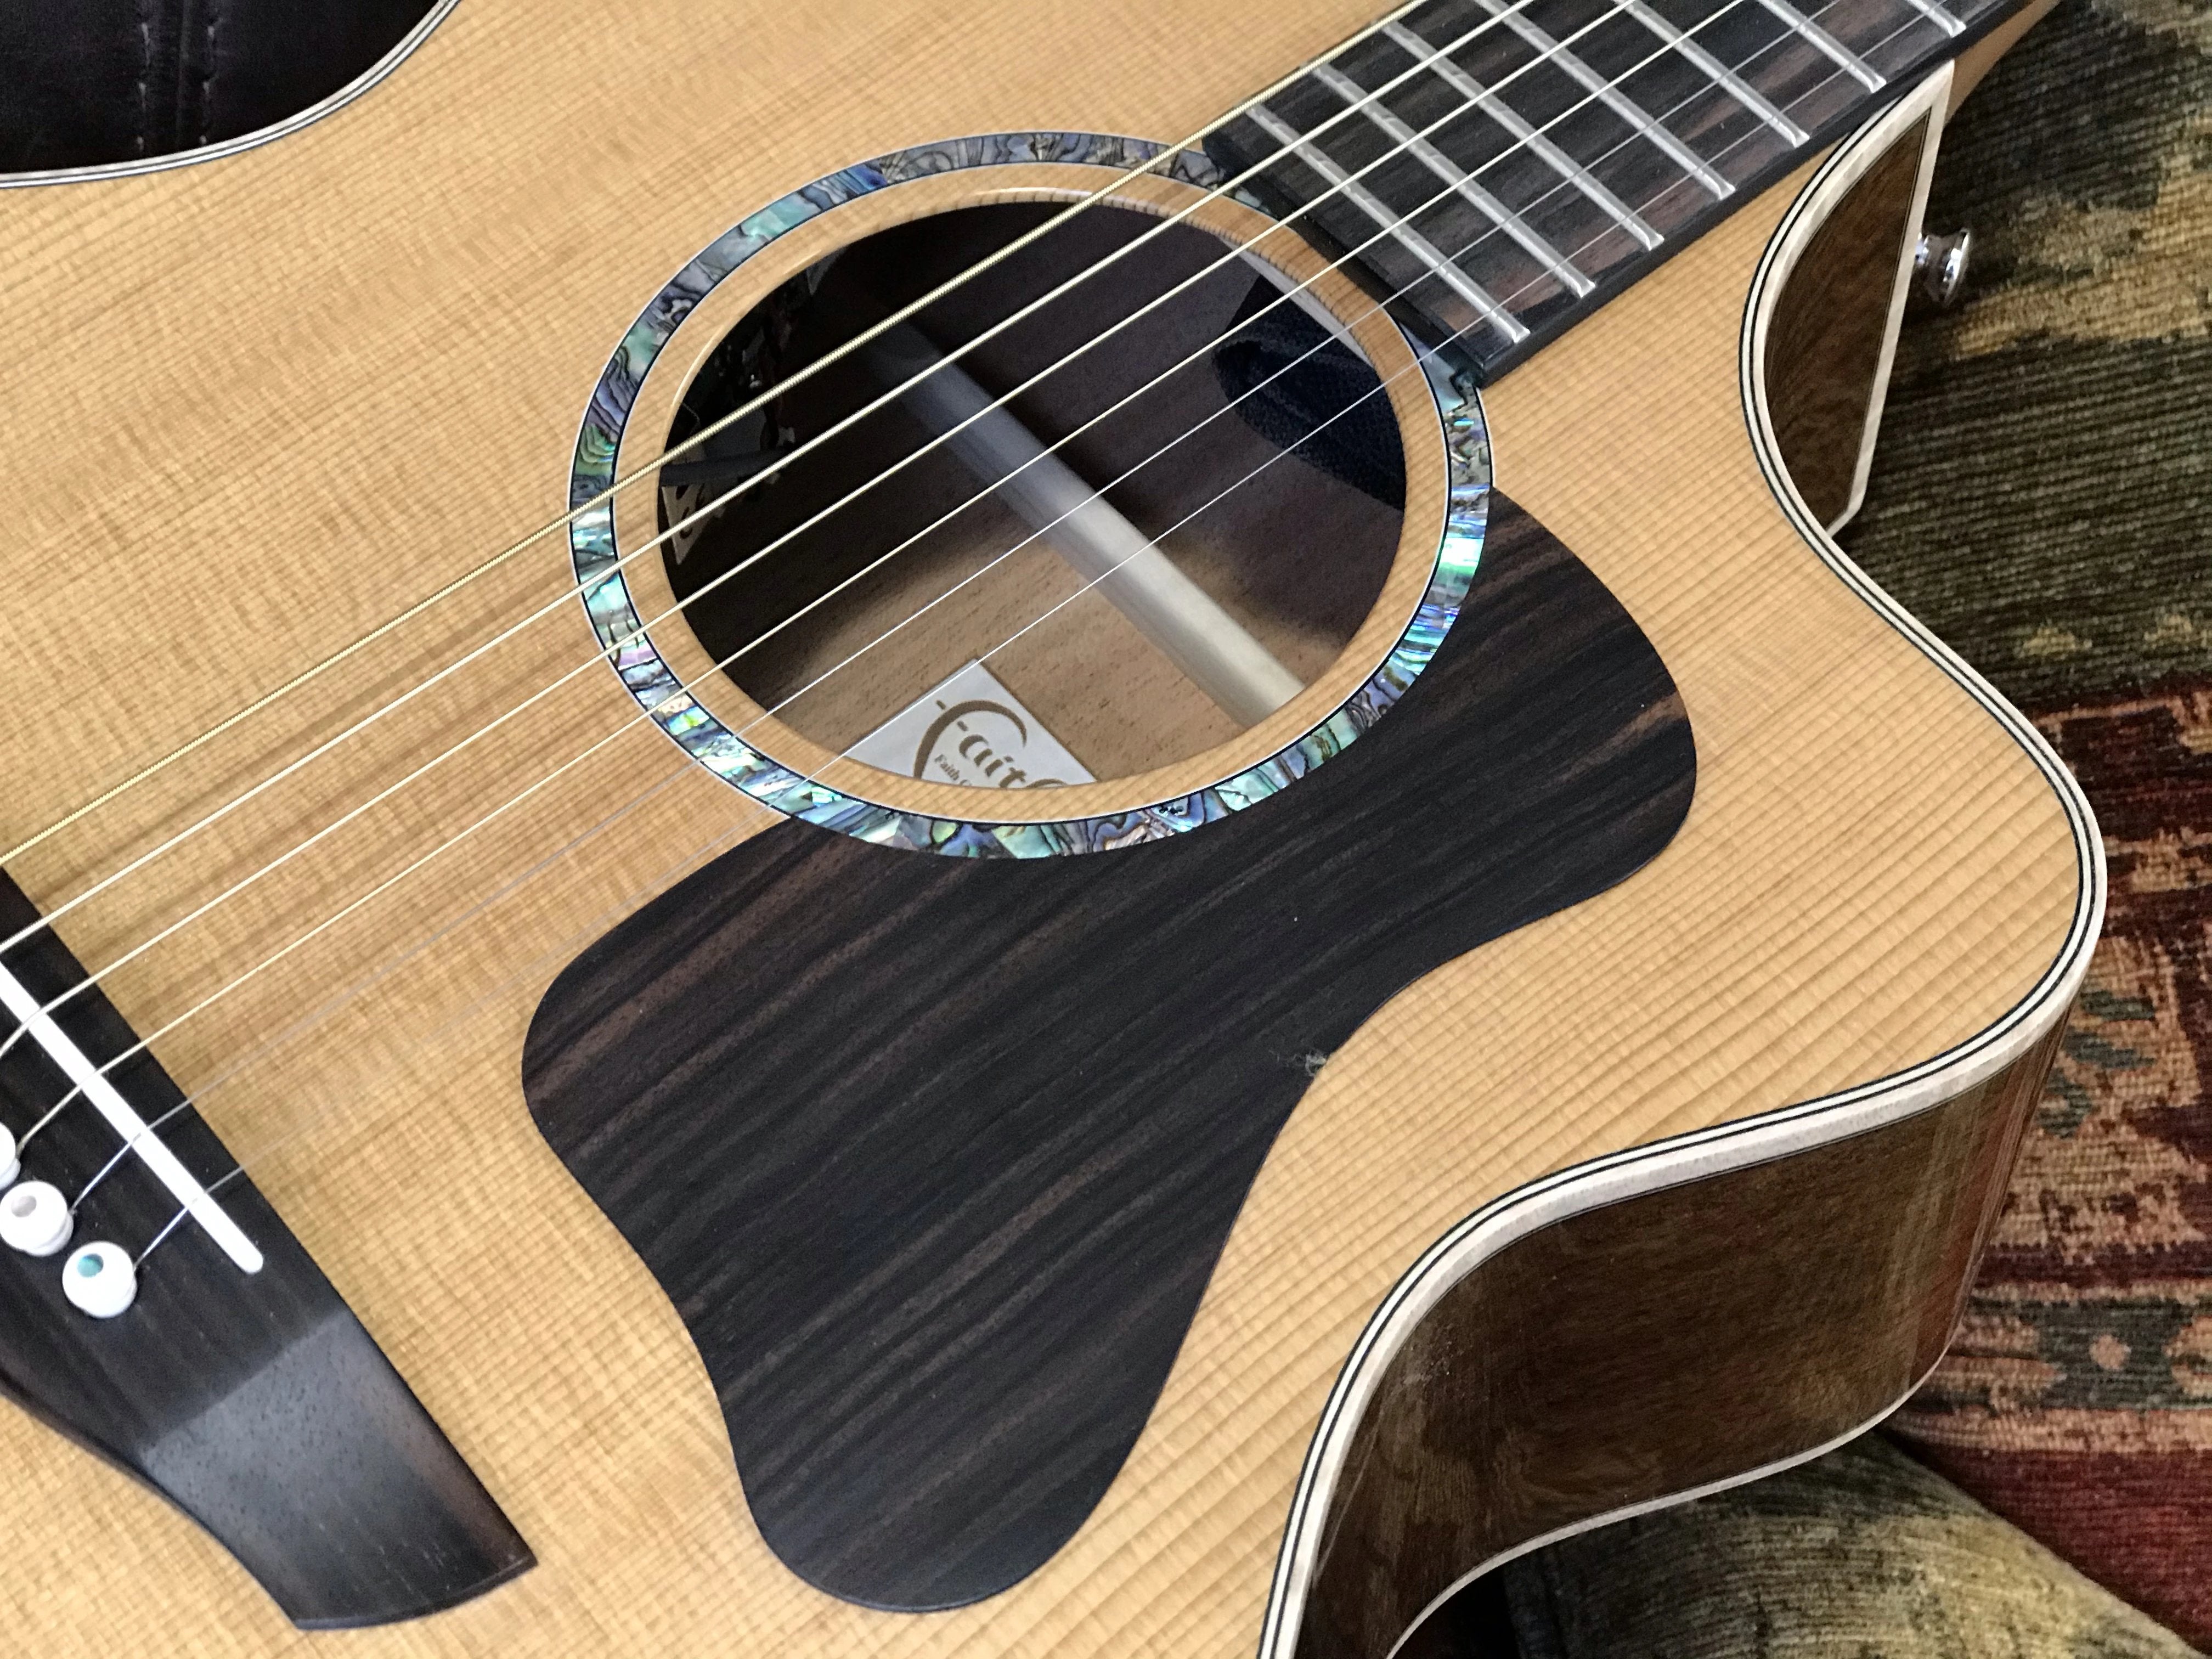 Faith FG1NCE - PJE Legacy Neptune Cut/Electro, Electro Acoustic Guitar for sale at Richards Guitars.